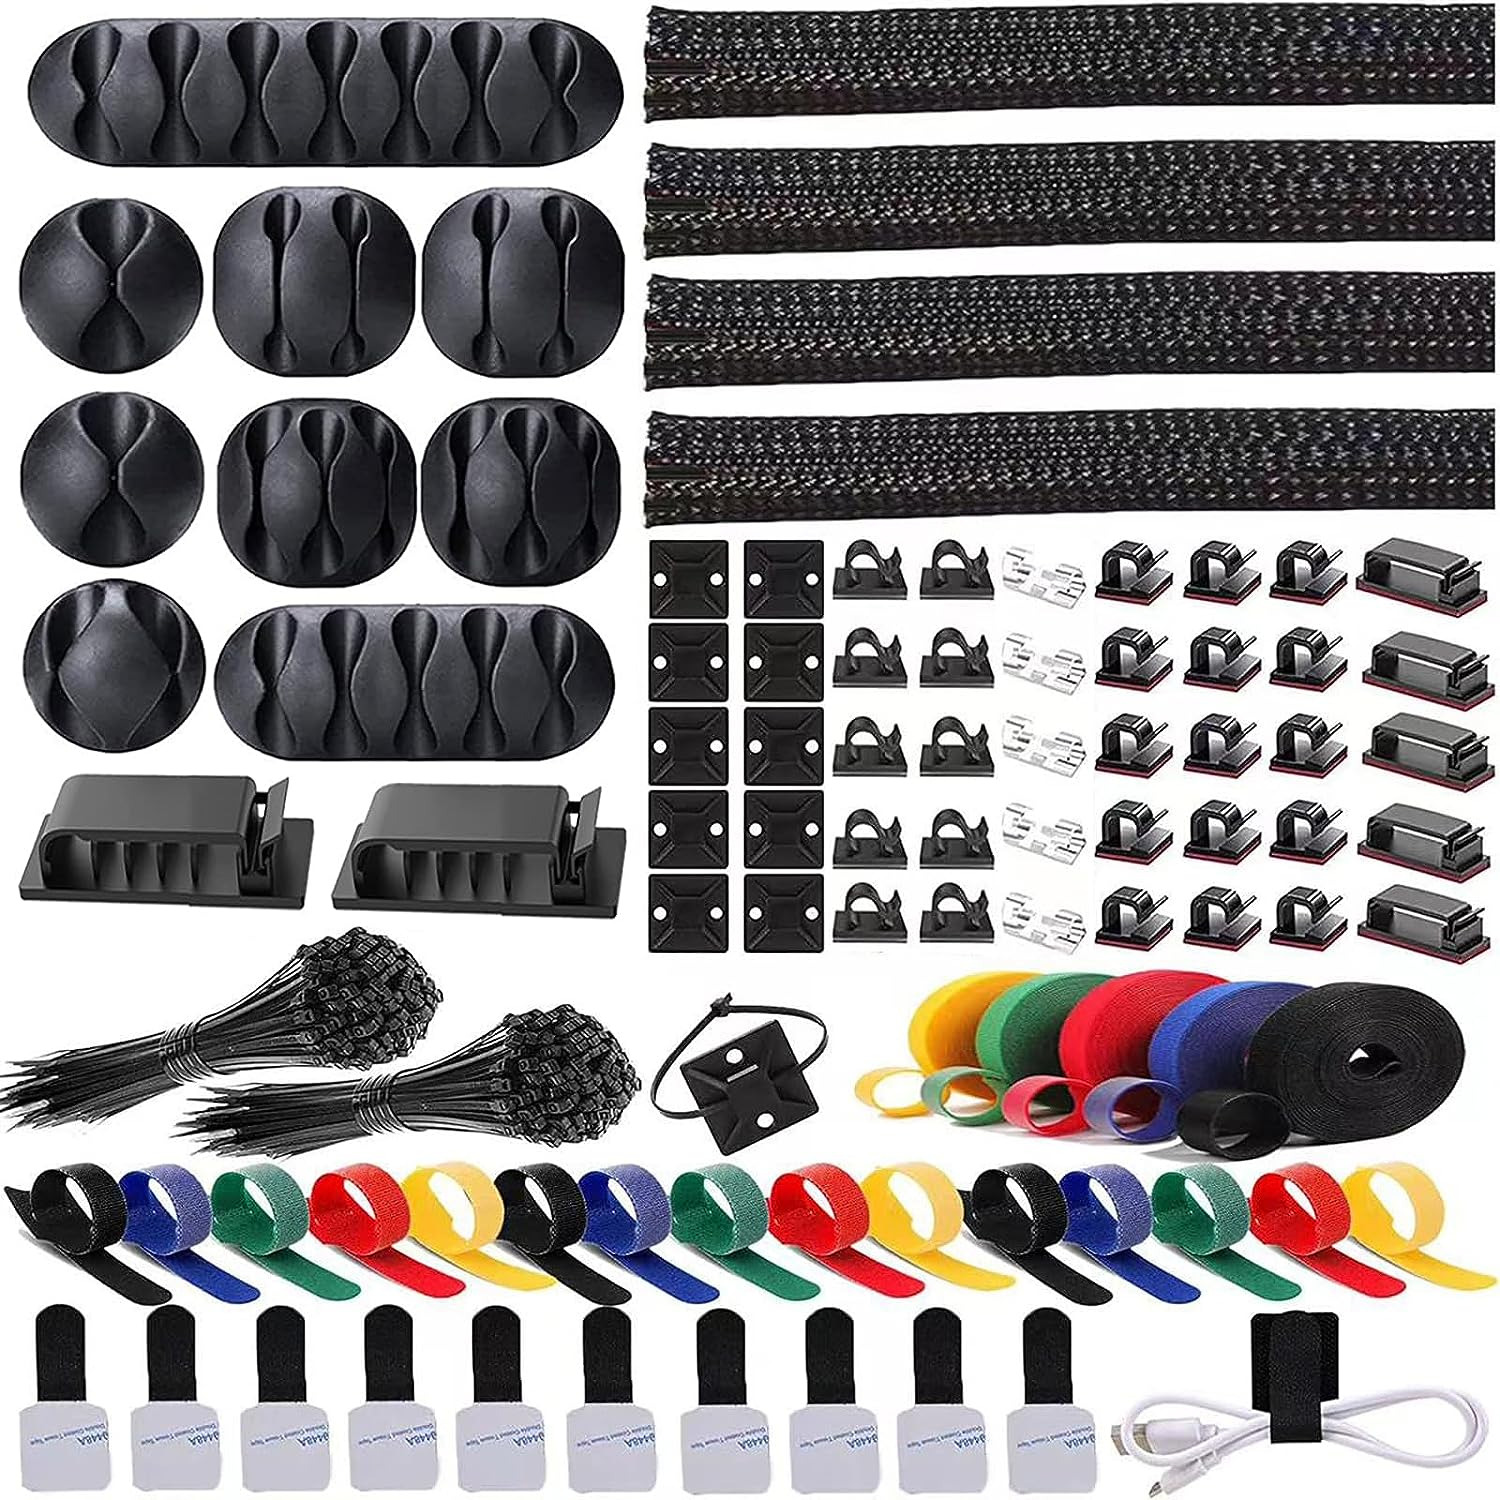 Cable Management Kit Includes 300Pcs 4 Cable Sleeves, 35 Cable Clips, 11 Cord Ho